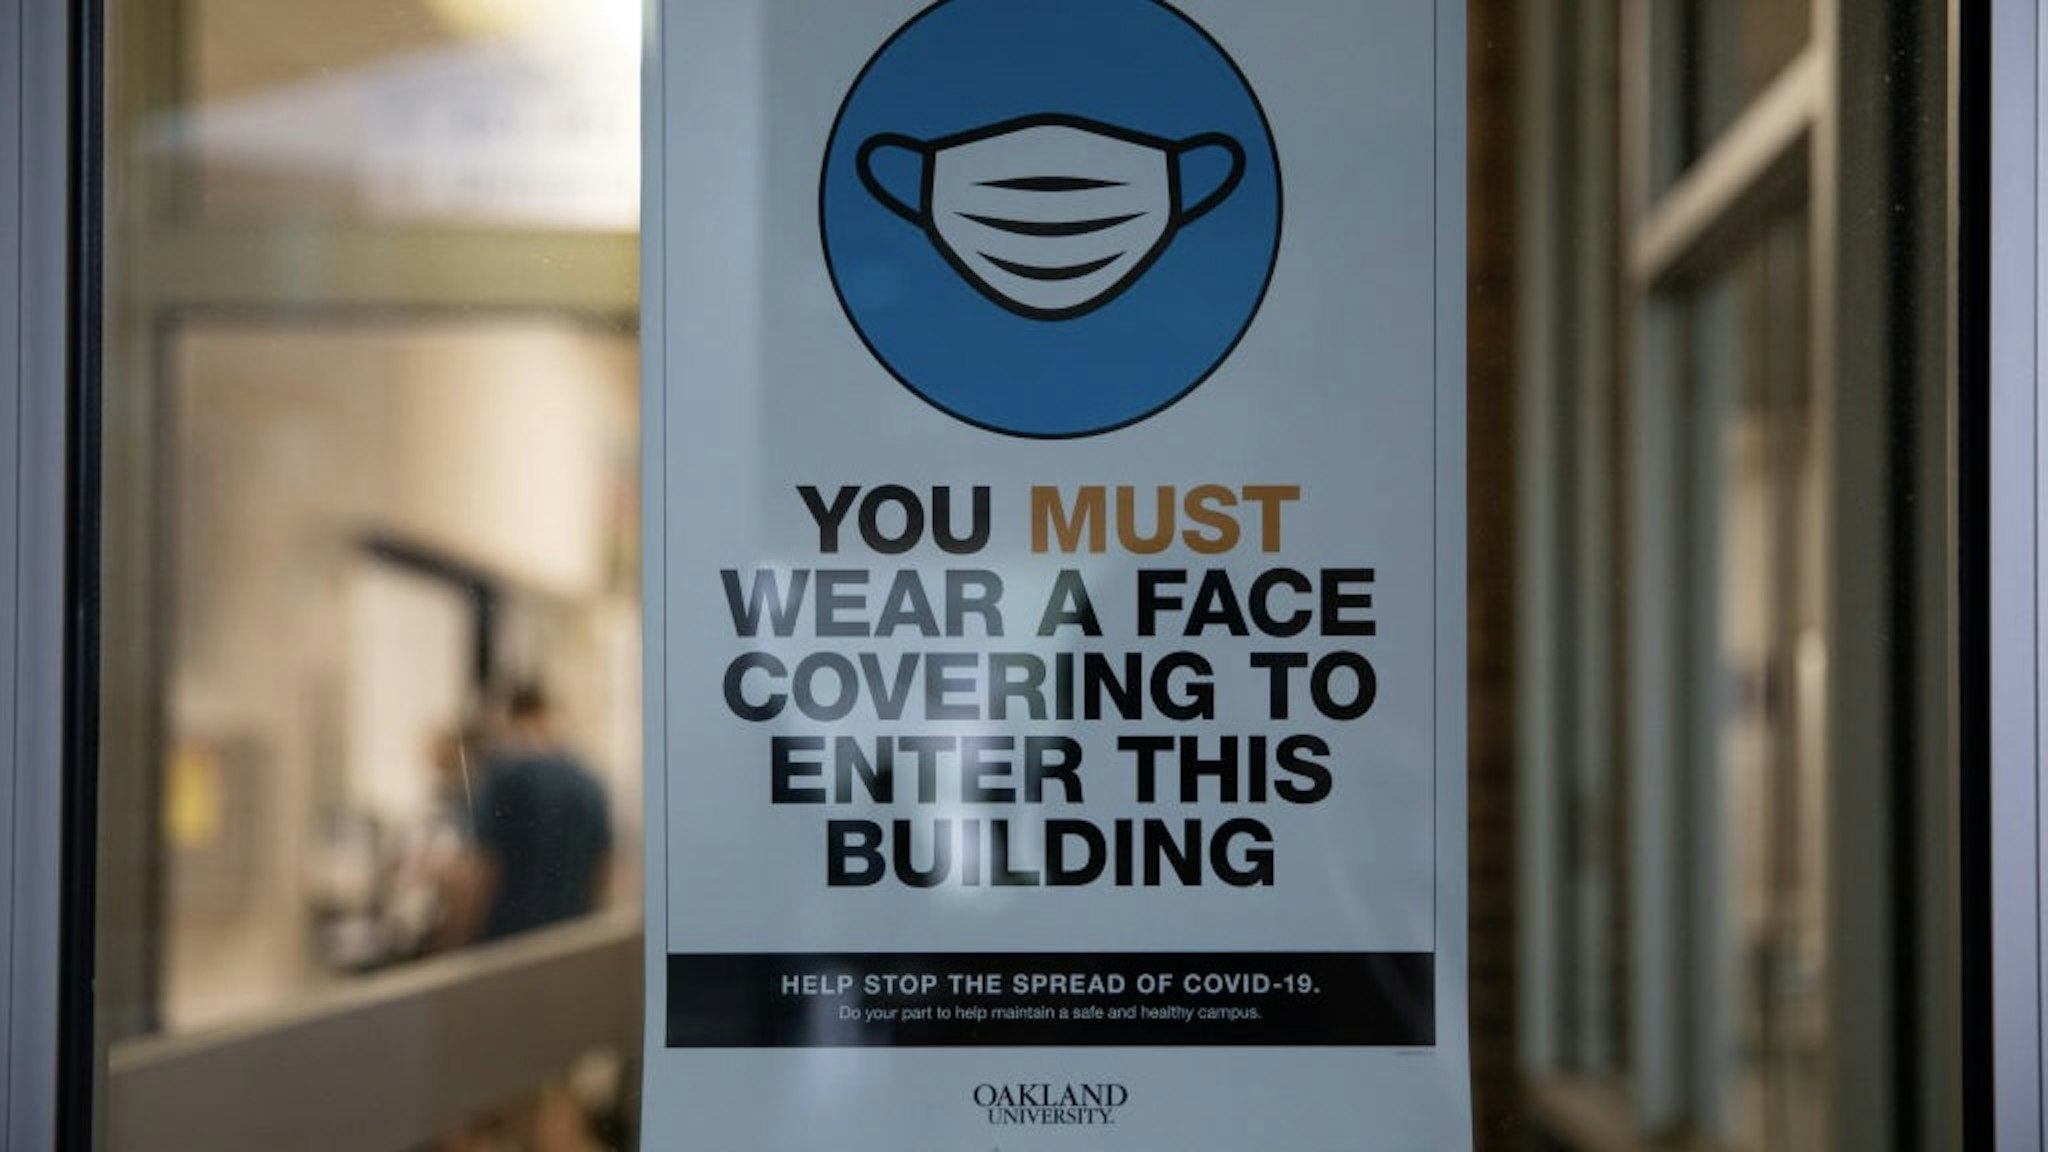 Students Return To Oakland University A face masks required sign at a dorm during move-in day at Oakland University in Rochester, Michigan, U.S., on Friday, Aug. 27, 2021. Oakland University announced Monday that it will require all students, faculty and staff on campus to get a Covid-19 vaccine, expanding its previous policy that only required students living in dormitories to be vaccinated, according to The Detroit News. Photographer: Emily Elconin/Bloomberg via Getty Images Bloomberg / Contributor